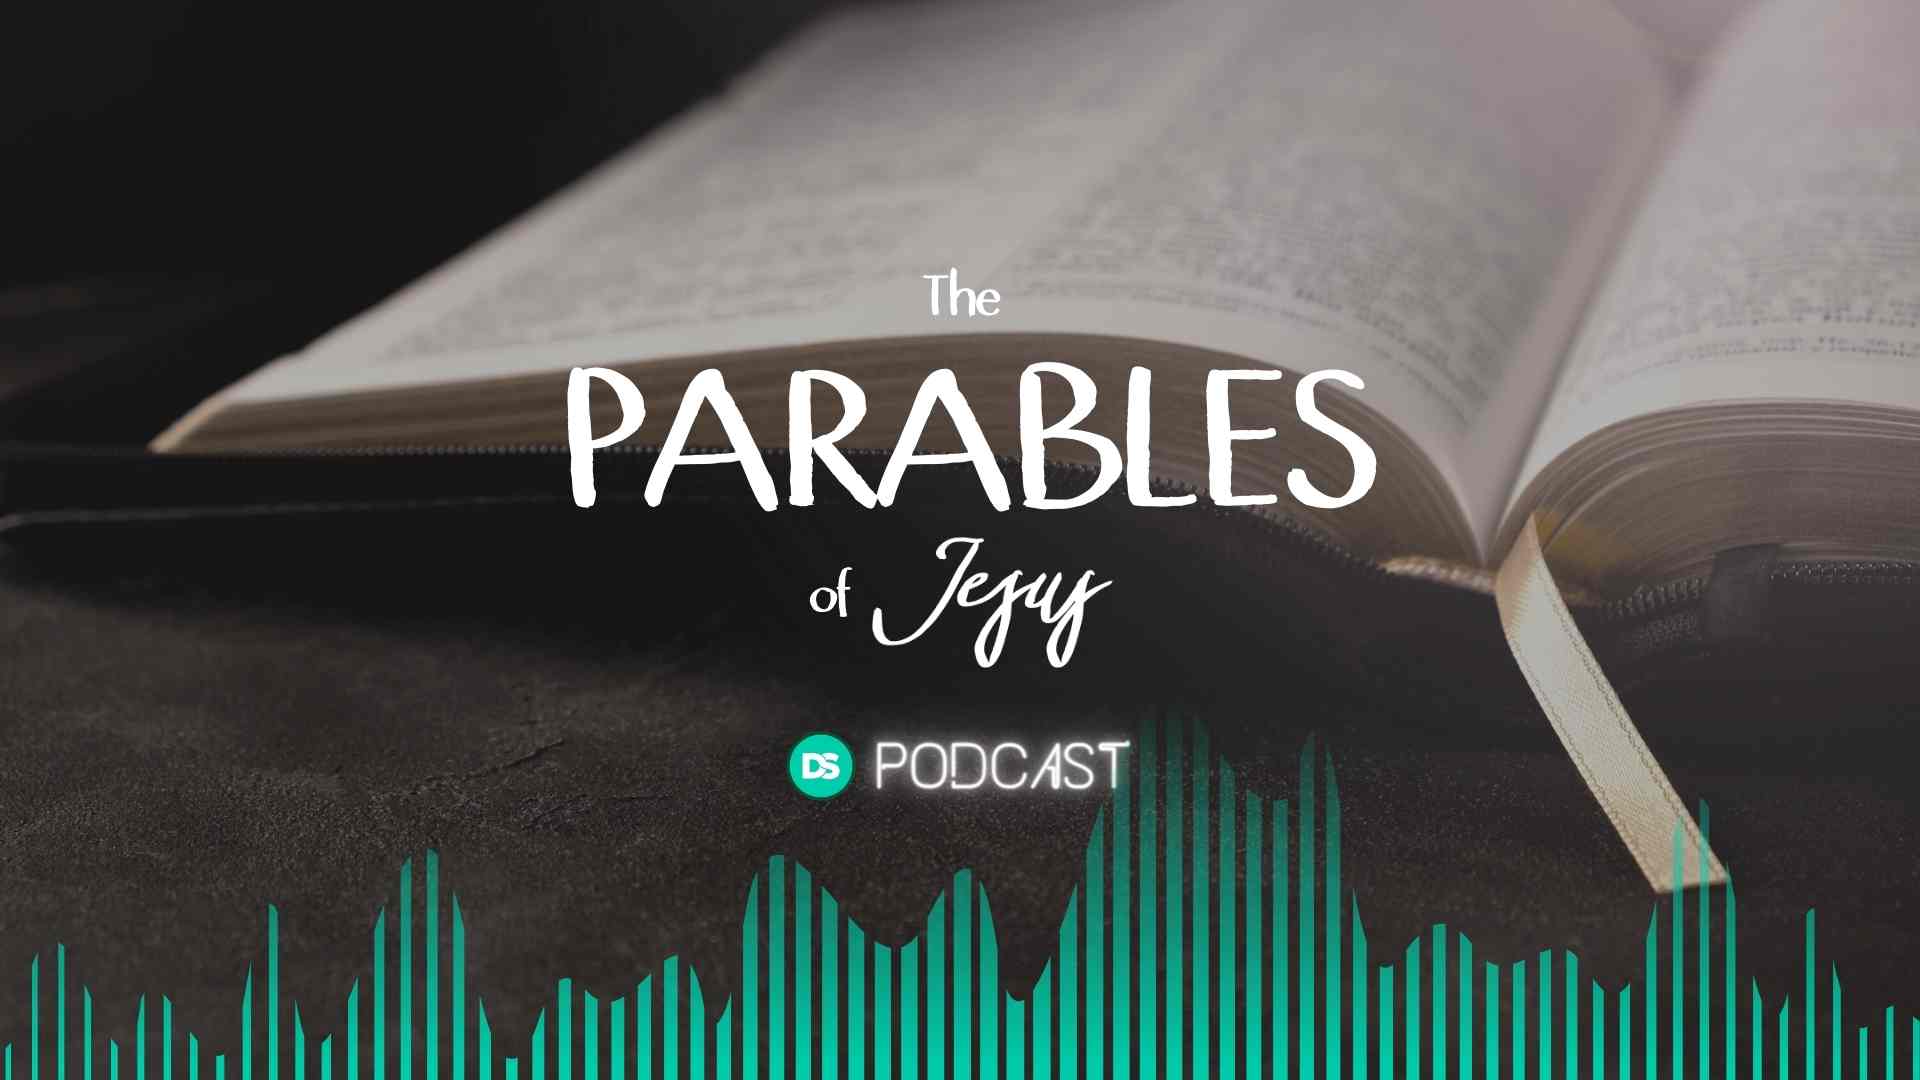 Introducing Our New Series on the Parables of Jesus 8